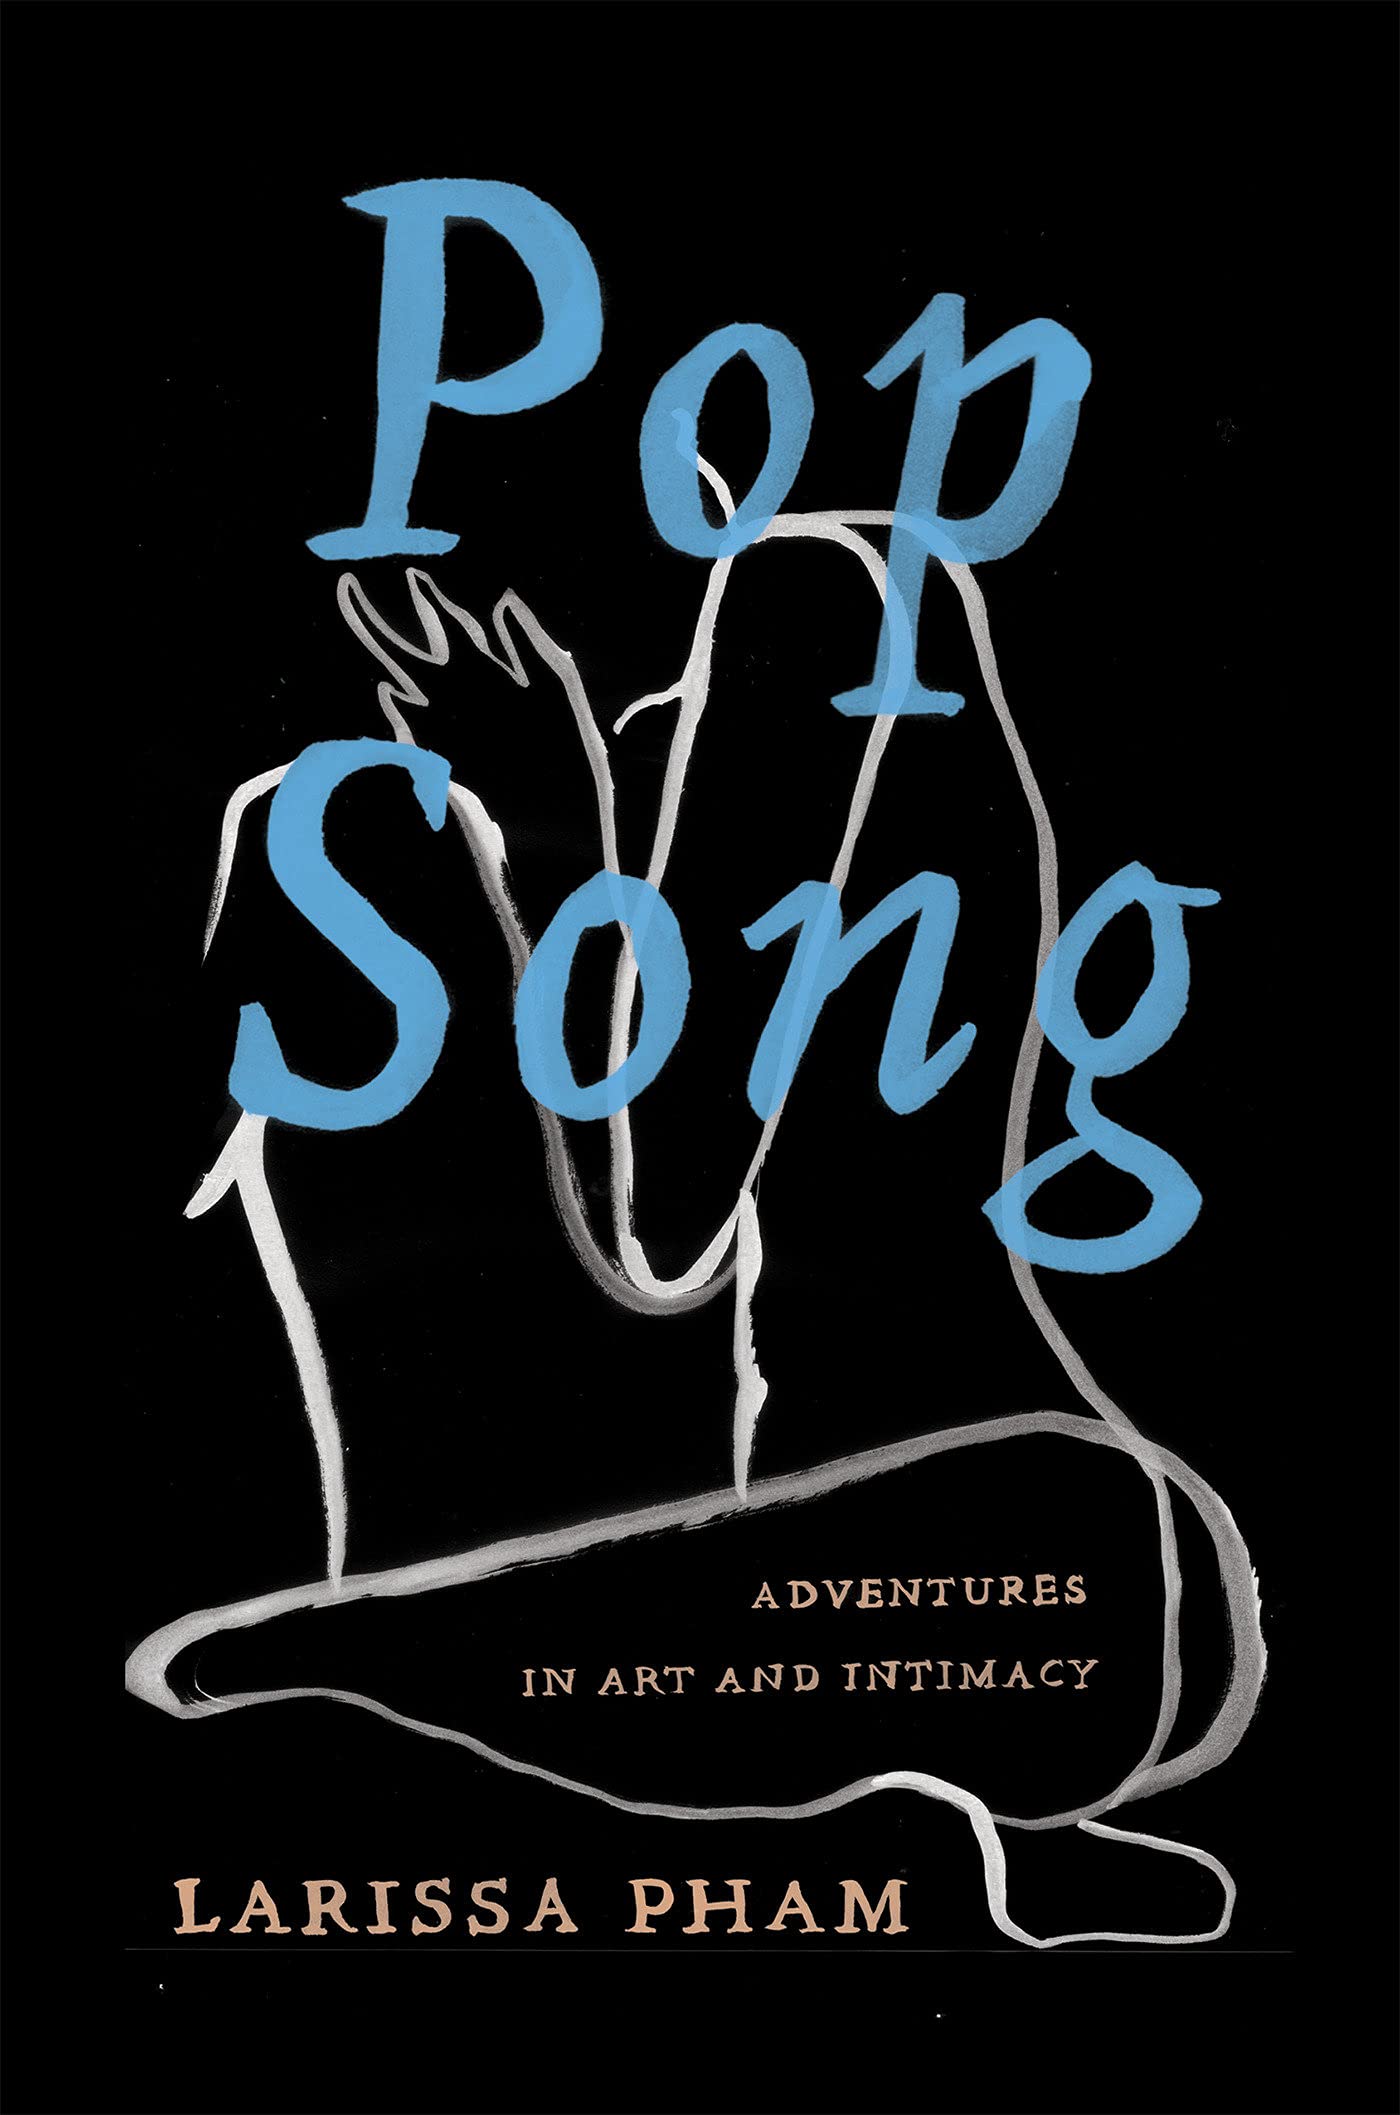 Cover of Pop Song, all black with a white, gestural drawing of a woman's form